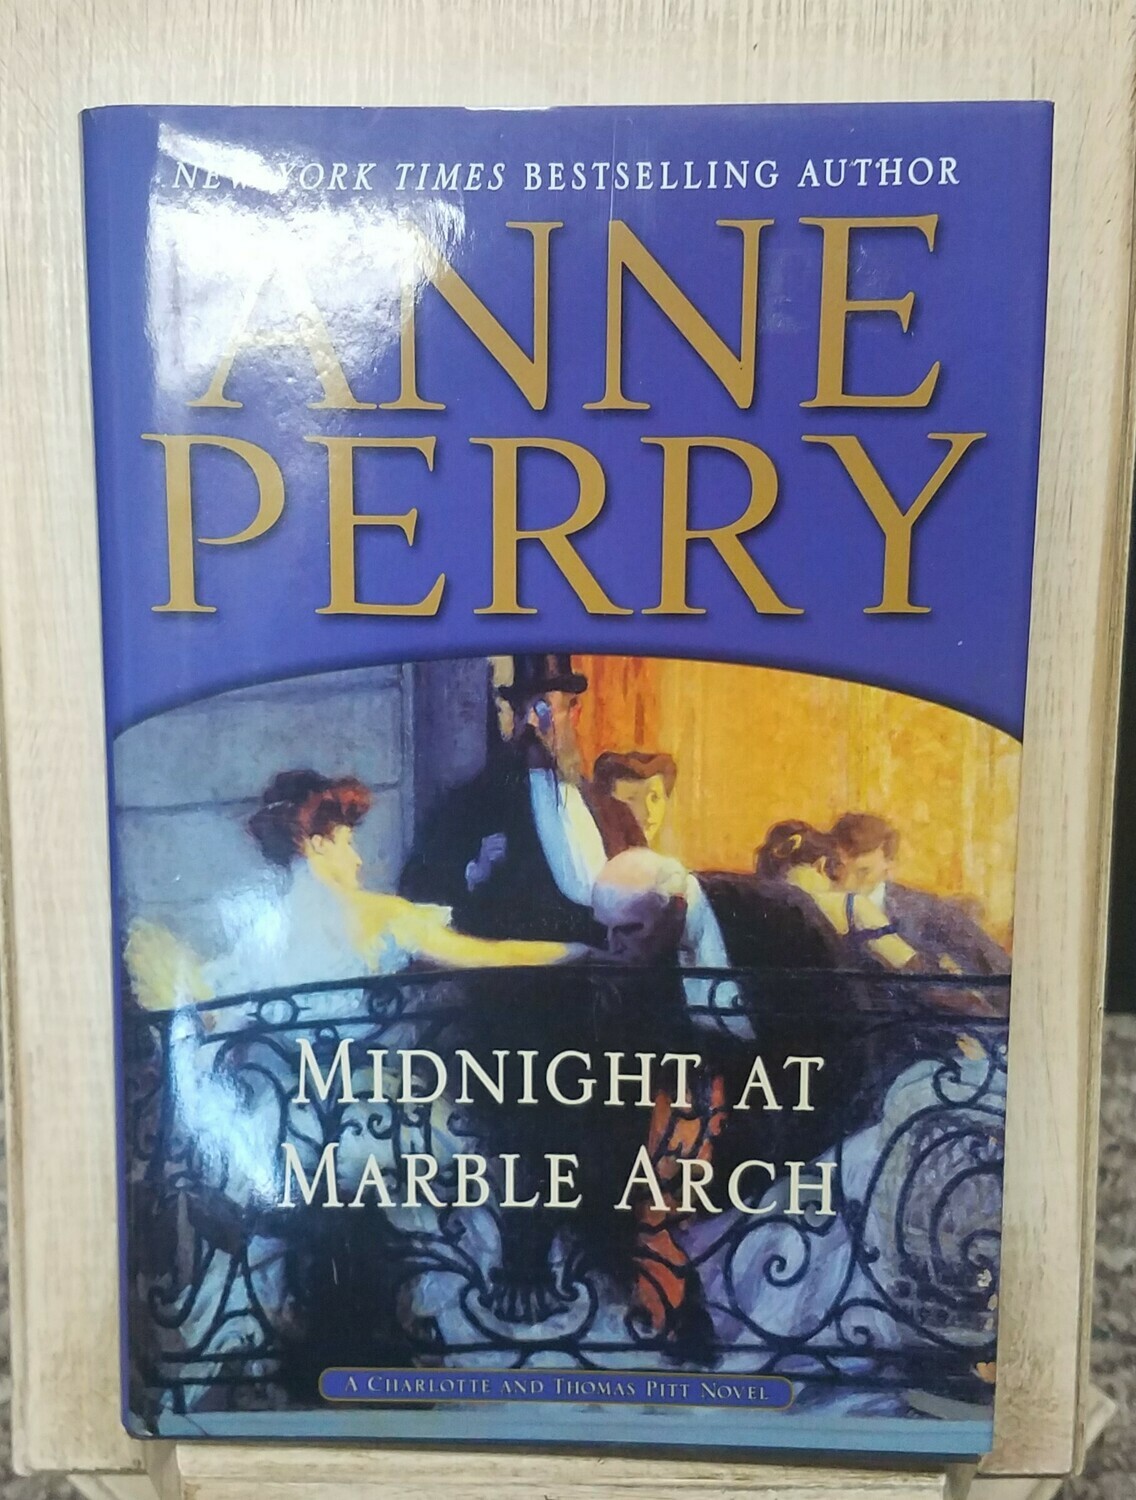 Midnight at Marble Arch by Anne Perry